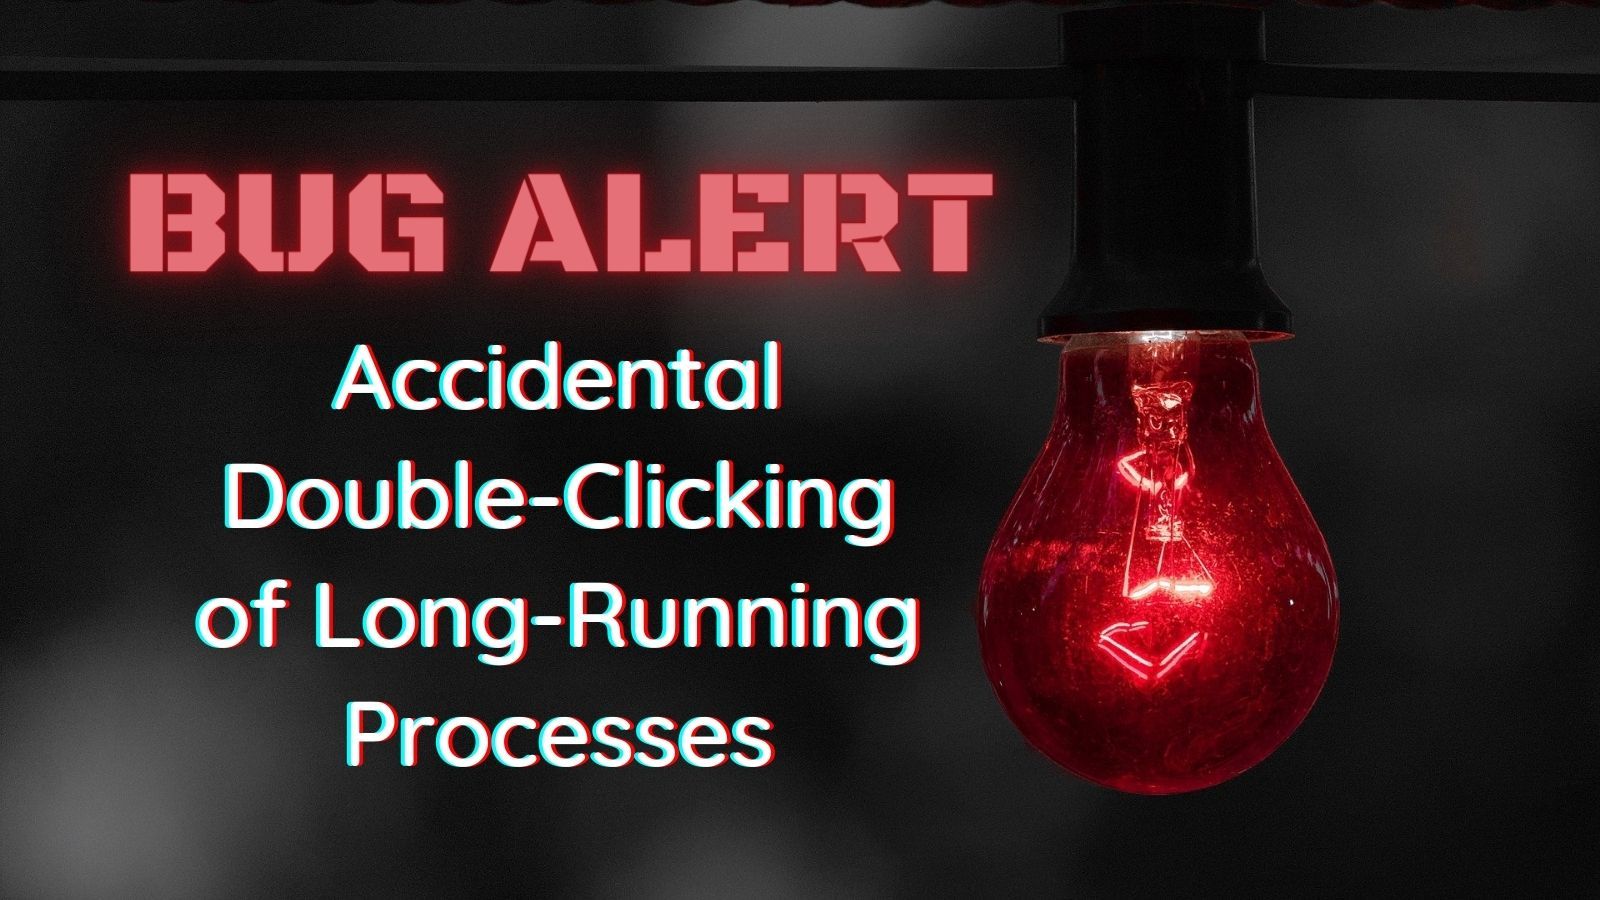 Bug Alert: Accidental 
Double-Clicking
of Long-Running Processes